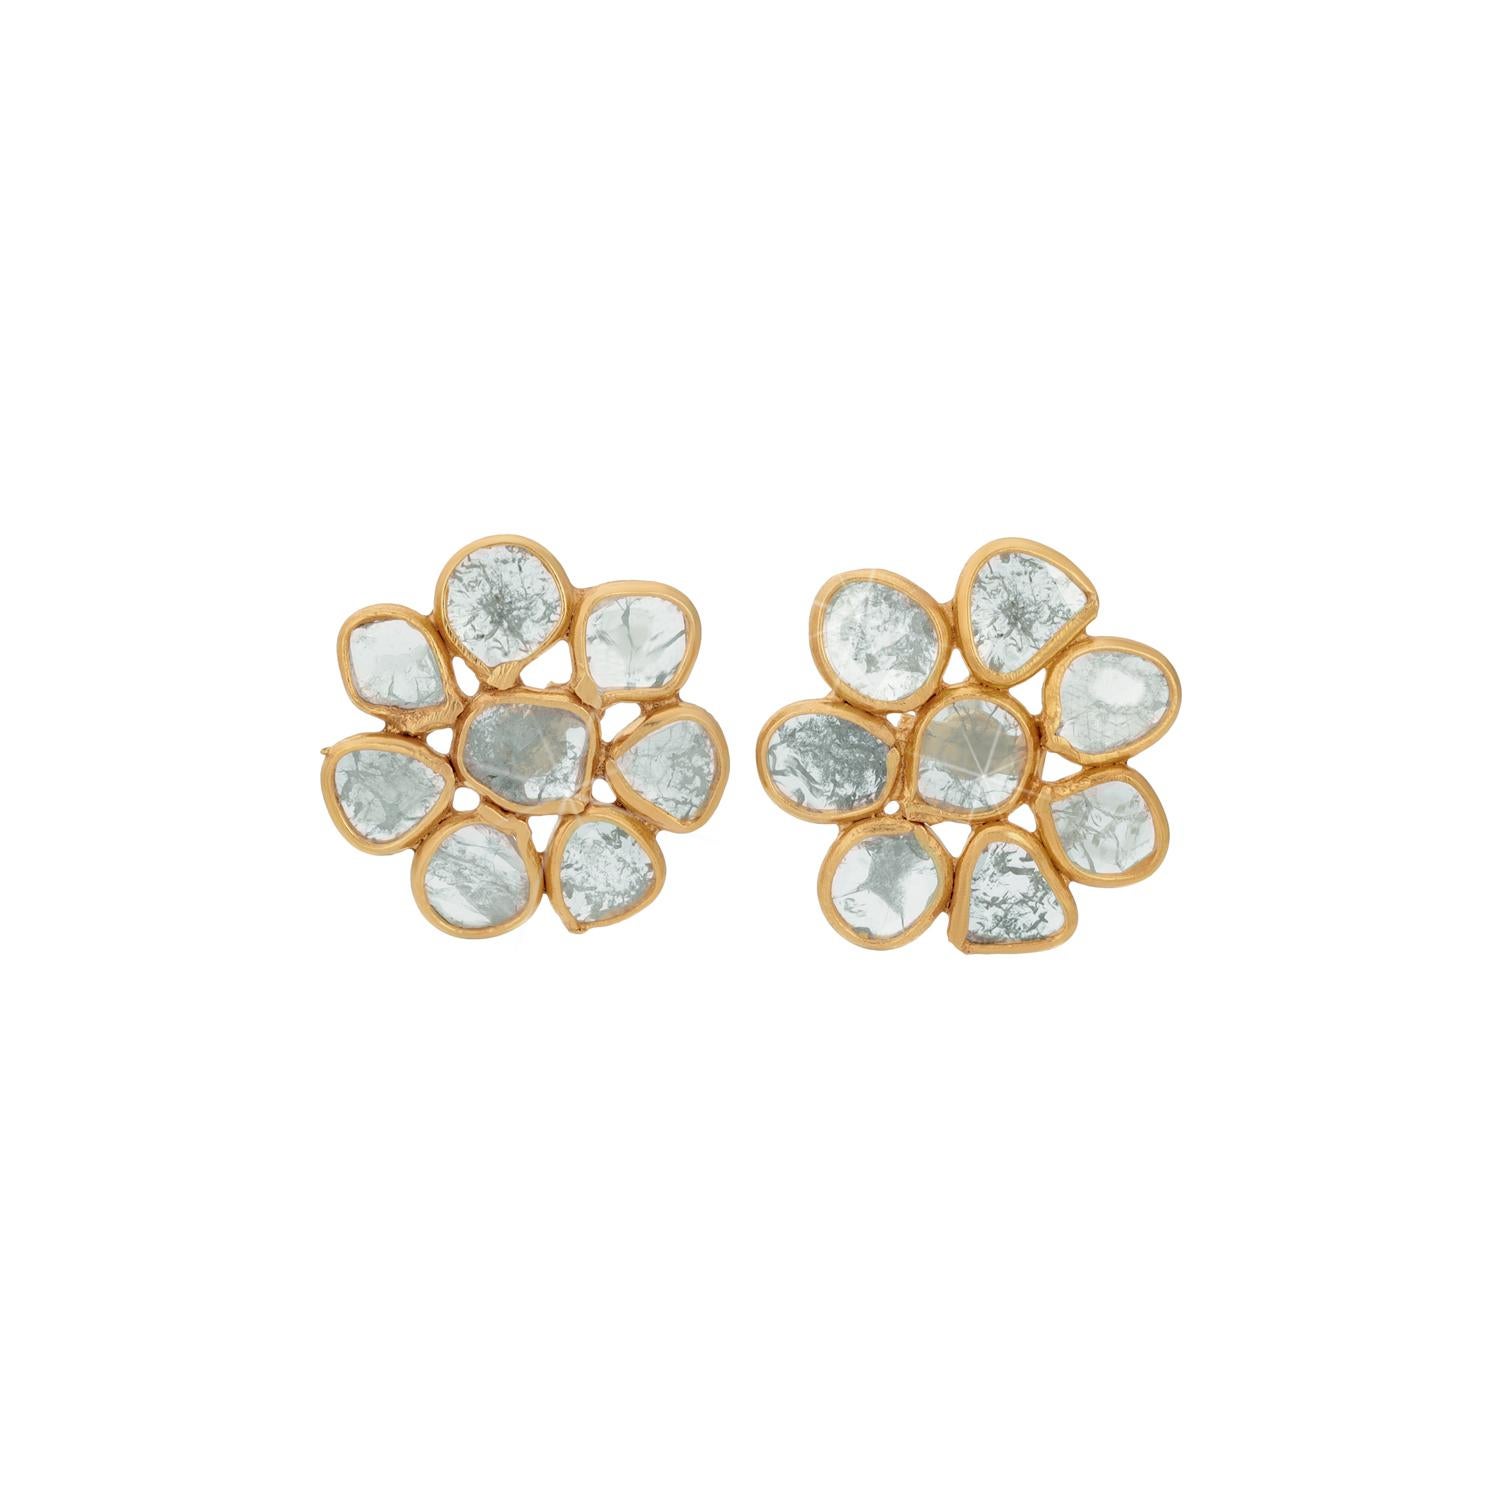 Kashmir Light Blue Sapphire Diaphanous Studs feature finely shaved light blue rose cut sapphires on stud earrings in a flower design of hand crafted gold filigree.

- Rose cut blue sapphires approx 4.20 carats.
- Set in 18 karat gold and silver.
-